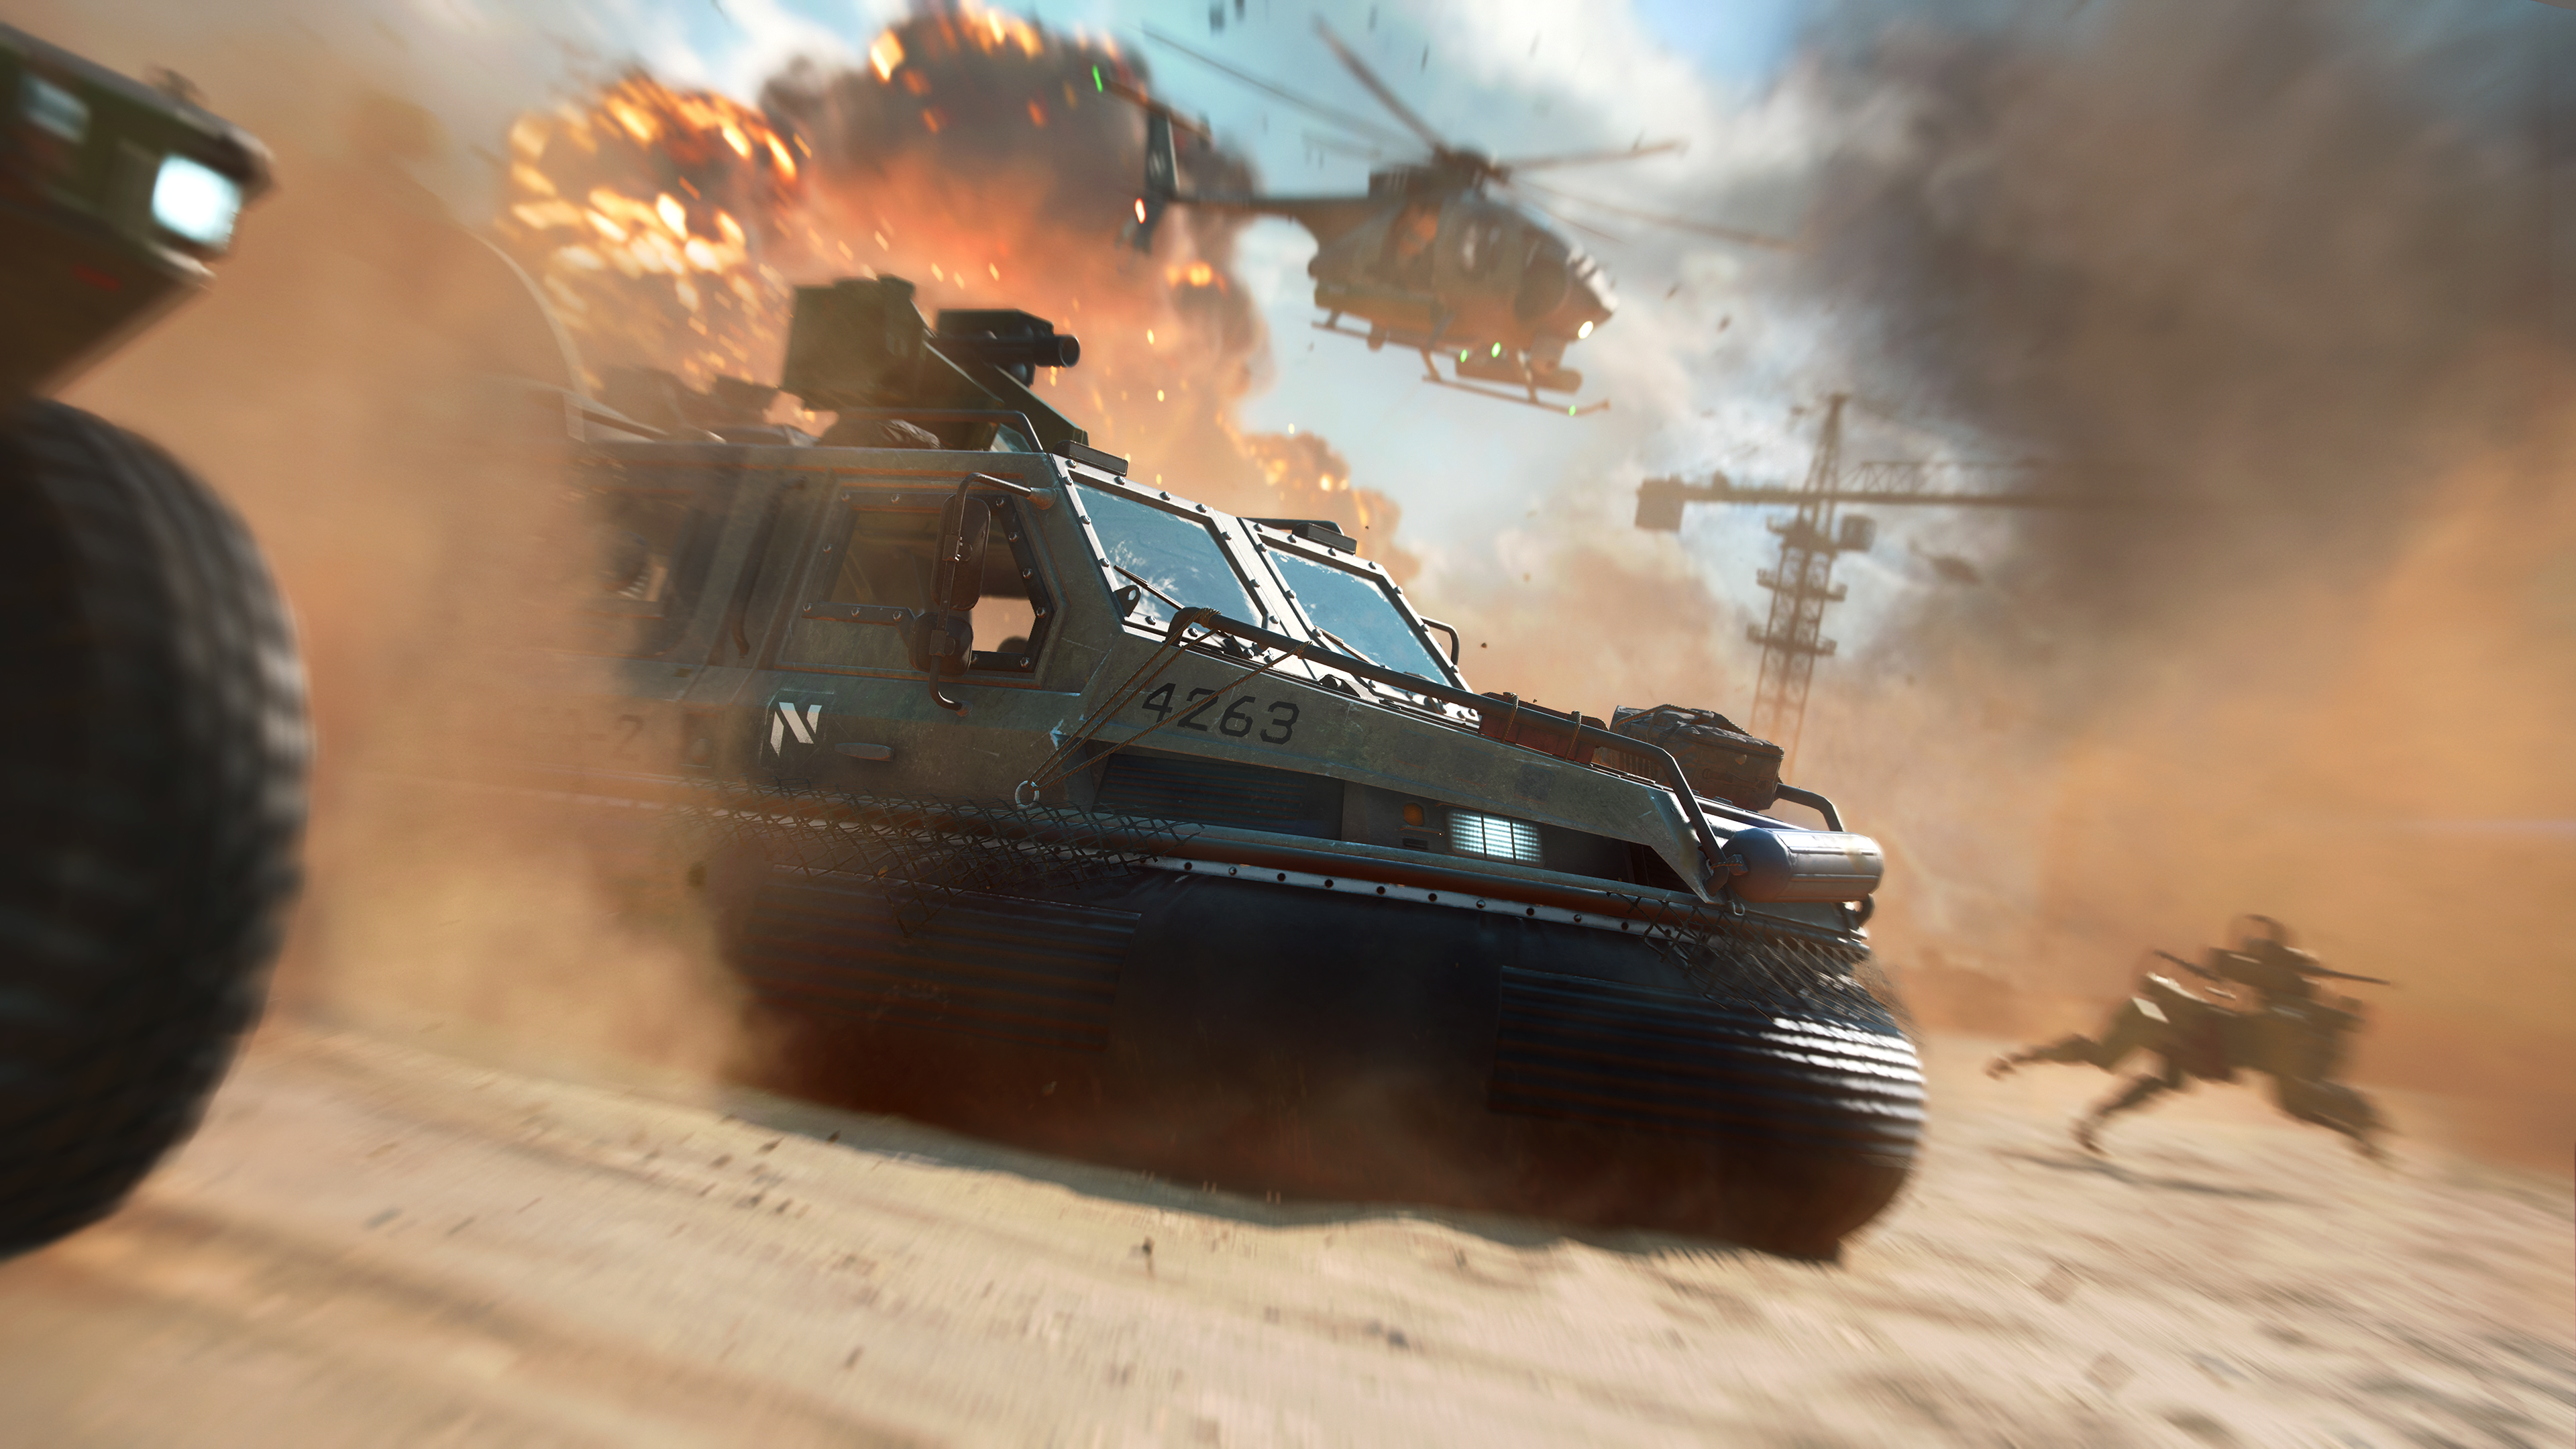 Battlefield 2042 a desert scene with moving vehicles and background explosions